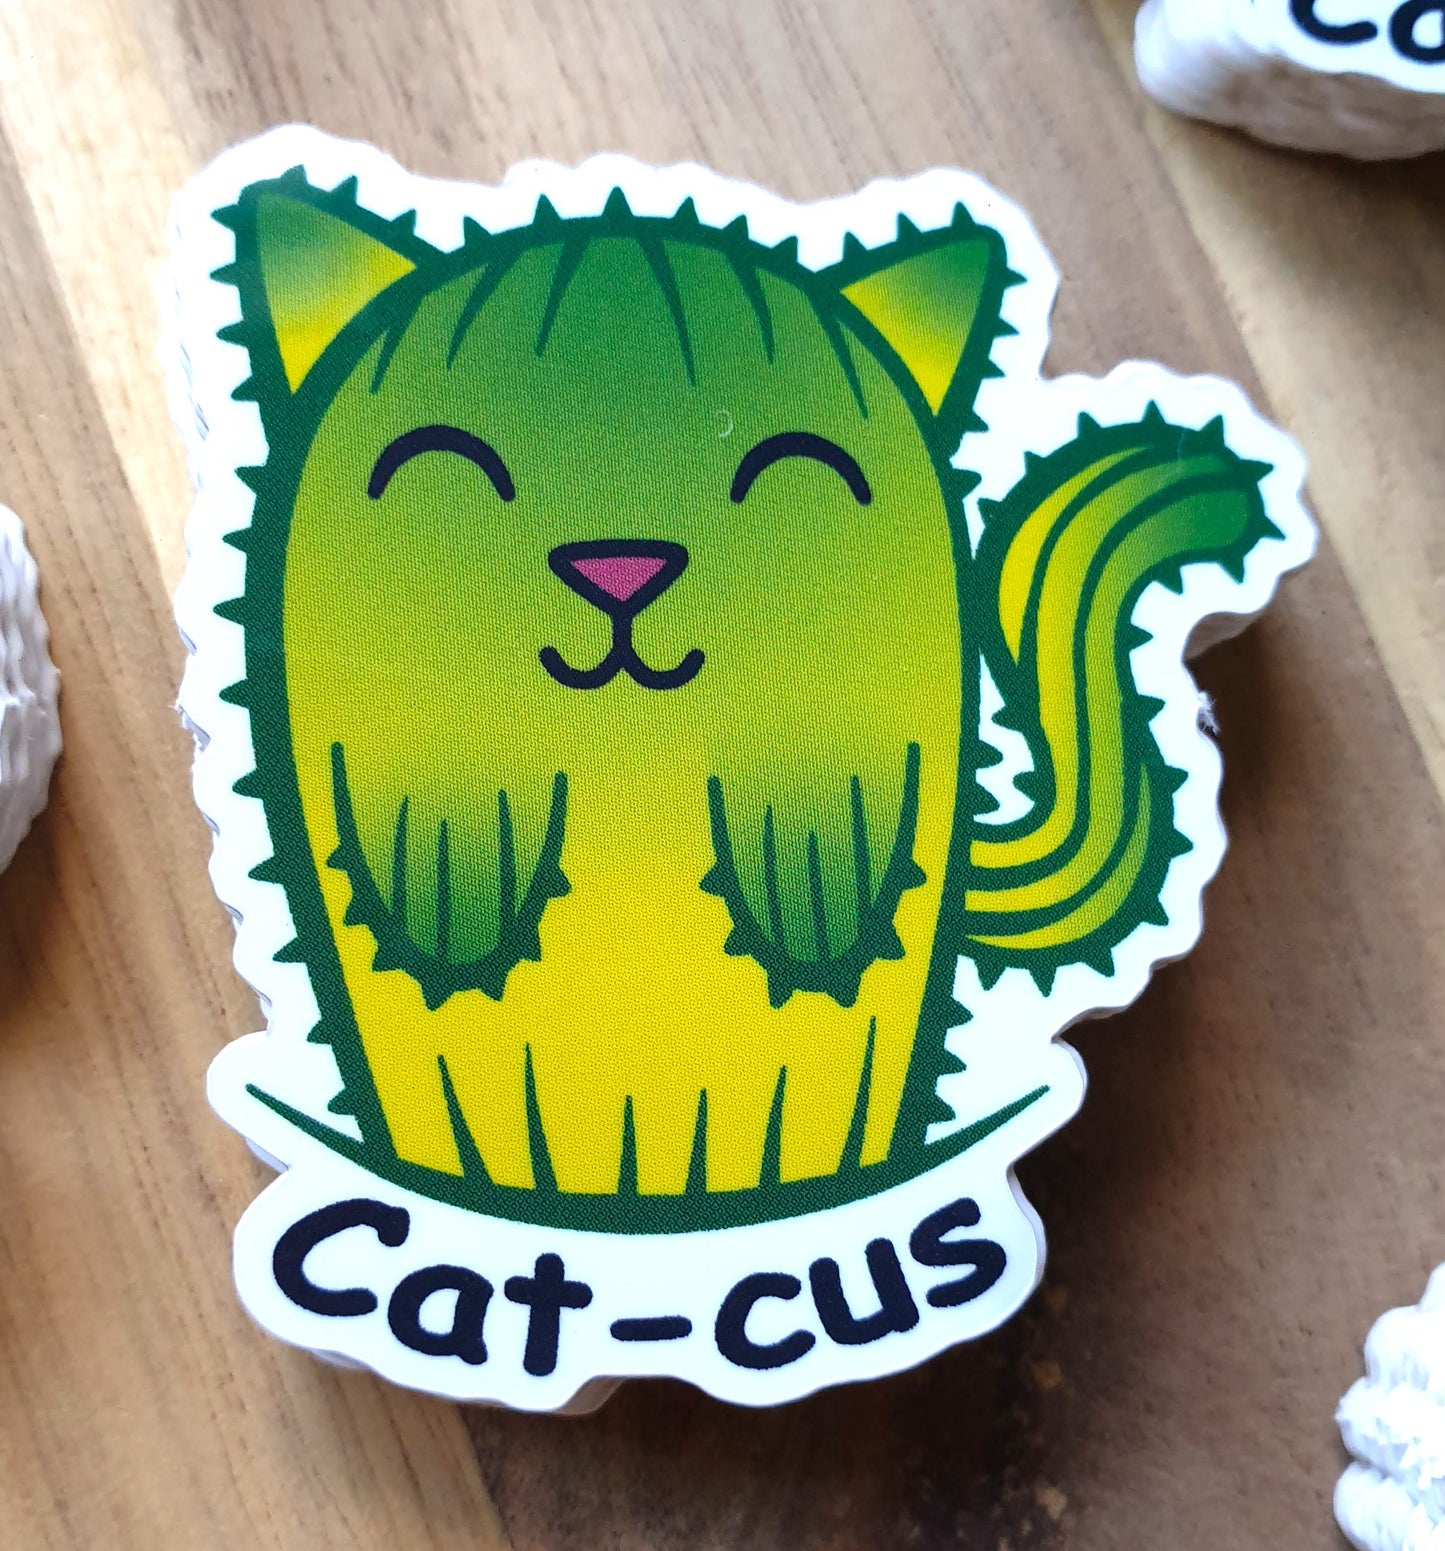 Cactus Sticker - "Cat-cus" - green and yellow